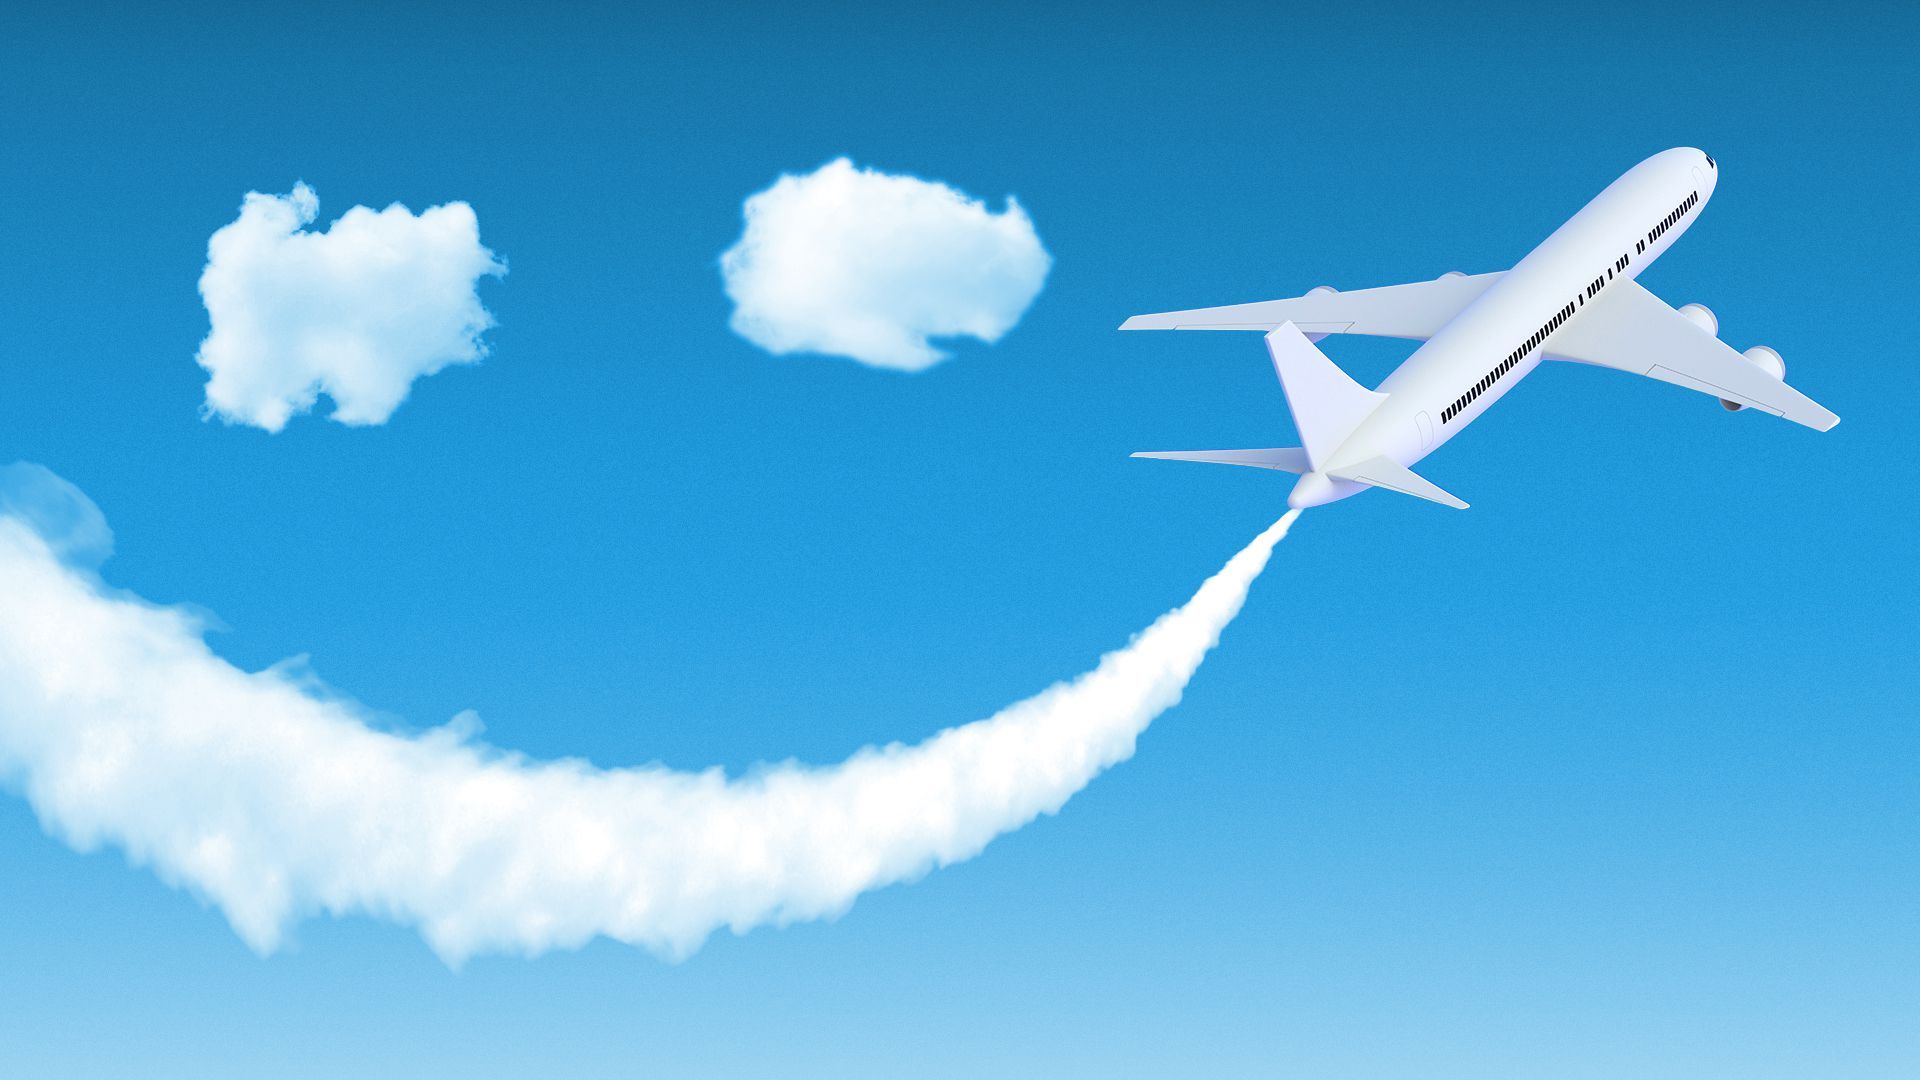 Illustration of an airplane's contrail forming a smiley face